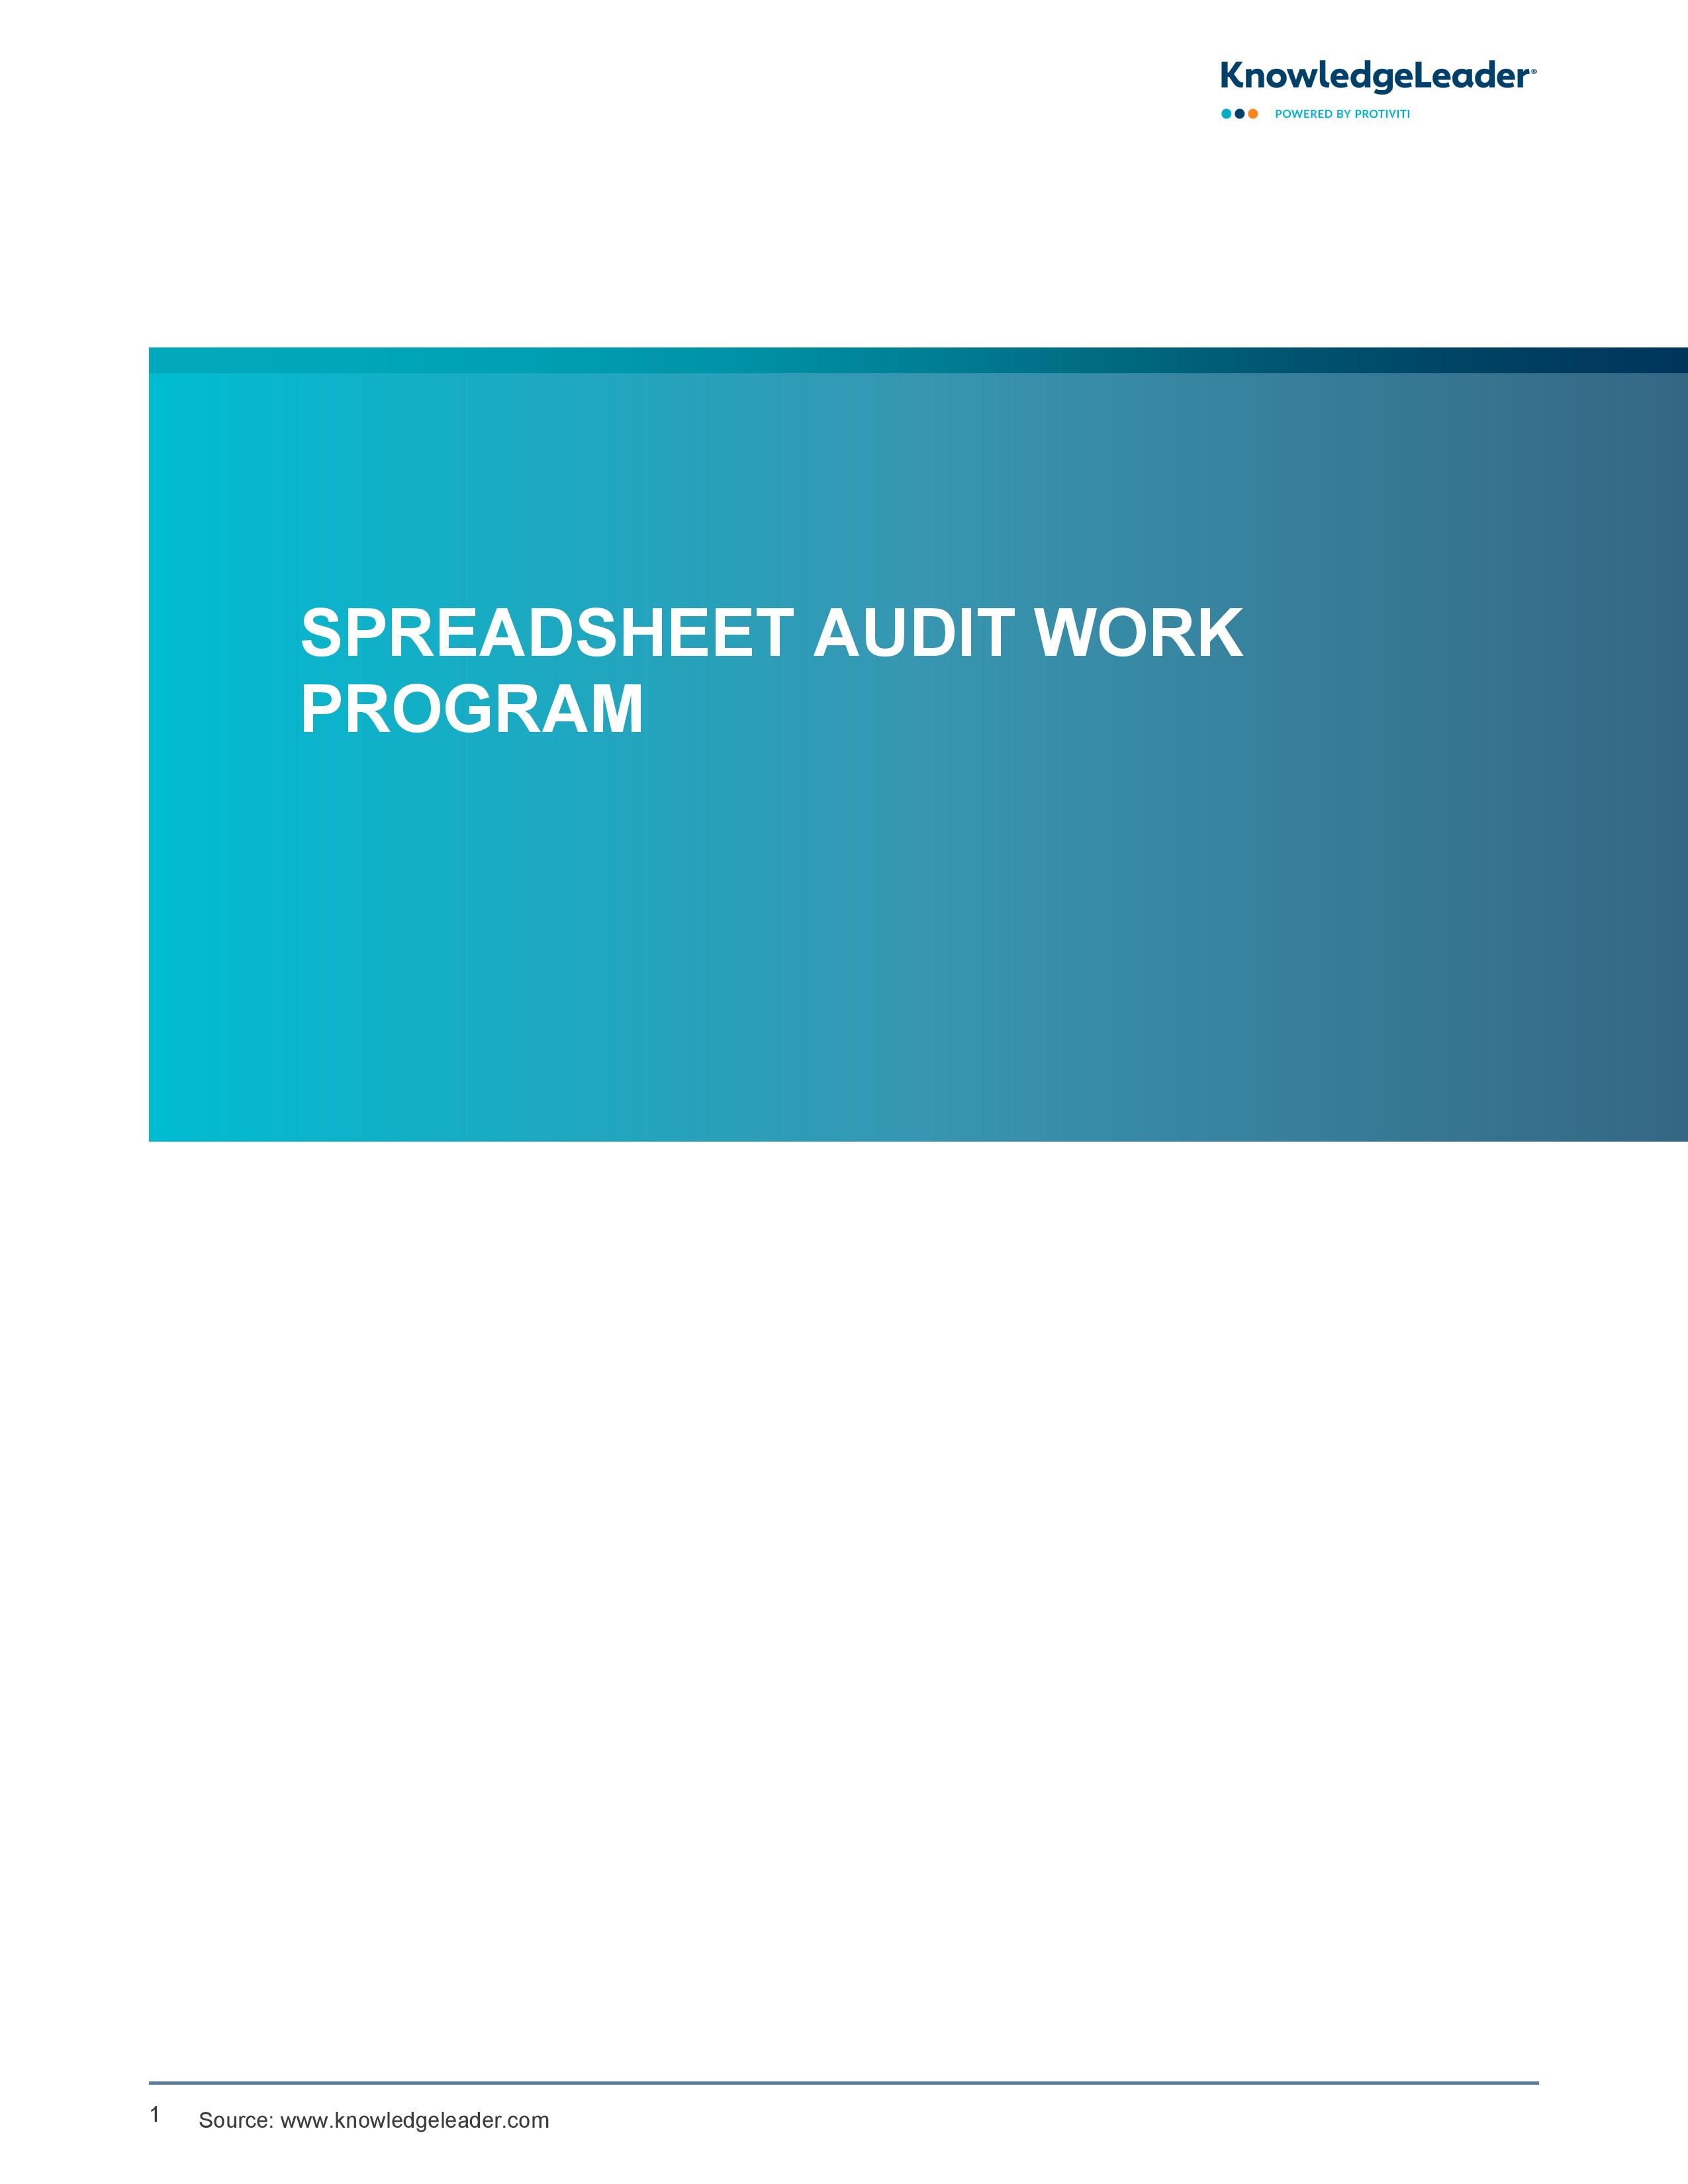 Screenshot of the first page of Spreadsheet Audit Work Program